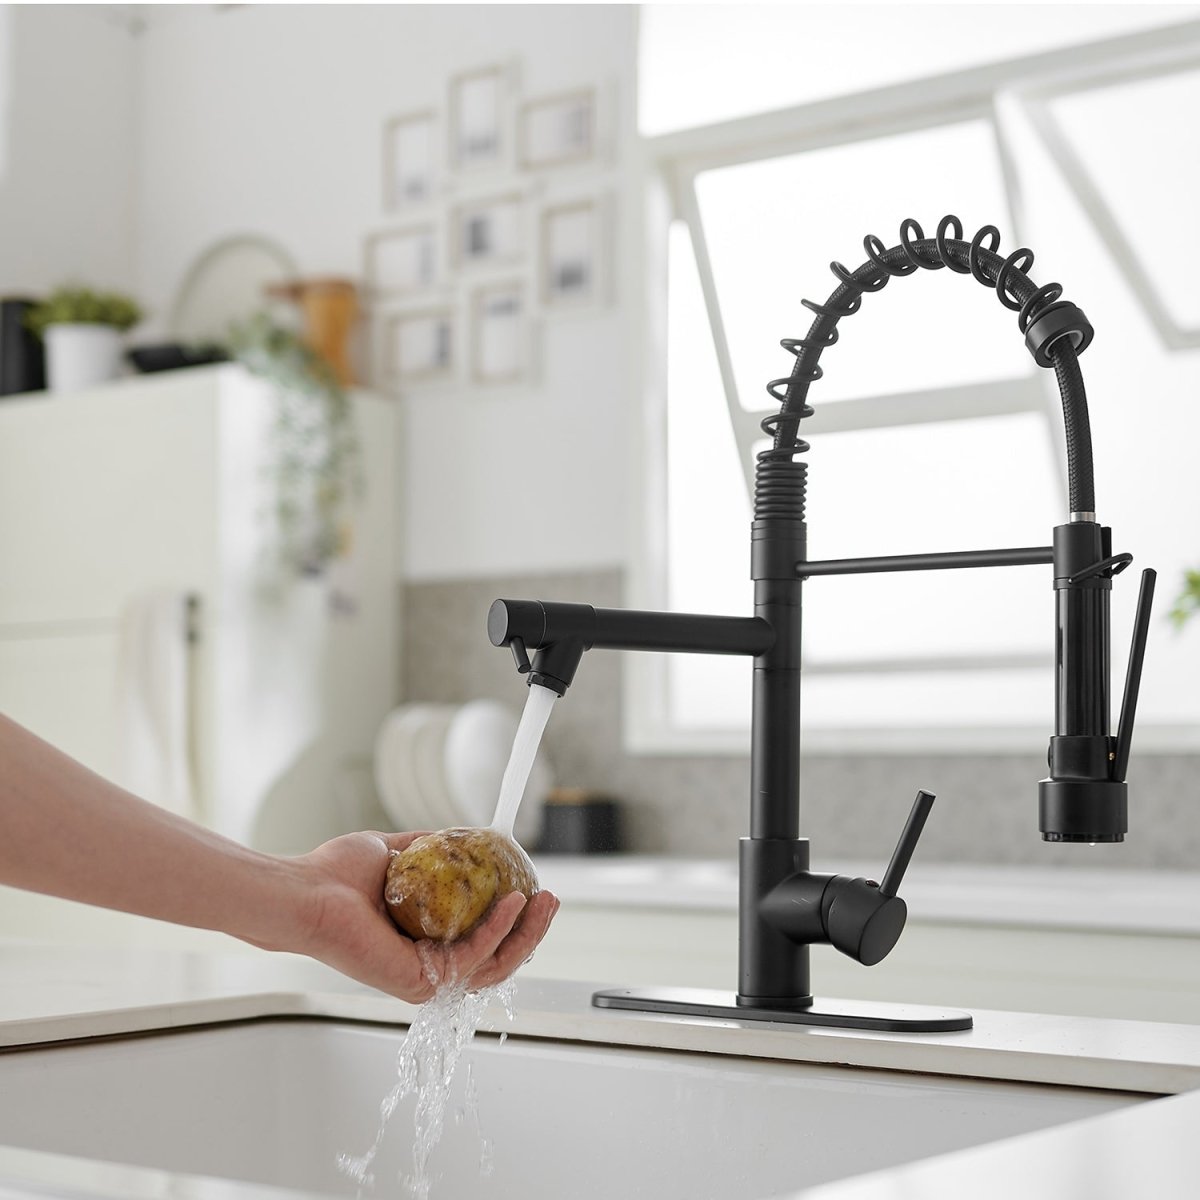 Single-Handle Pull-Down Kitchen Faucet with Deck Plate Black - buyfaucet.com